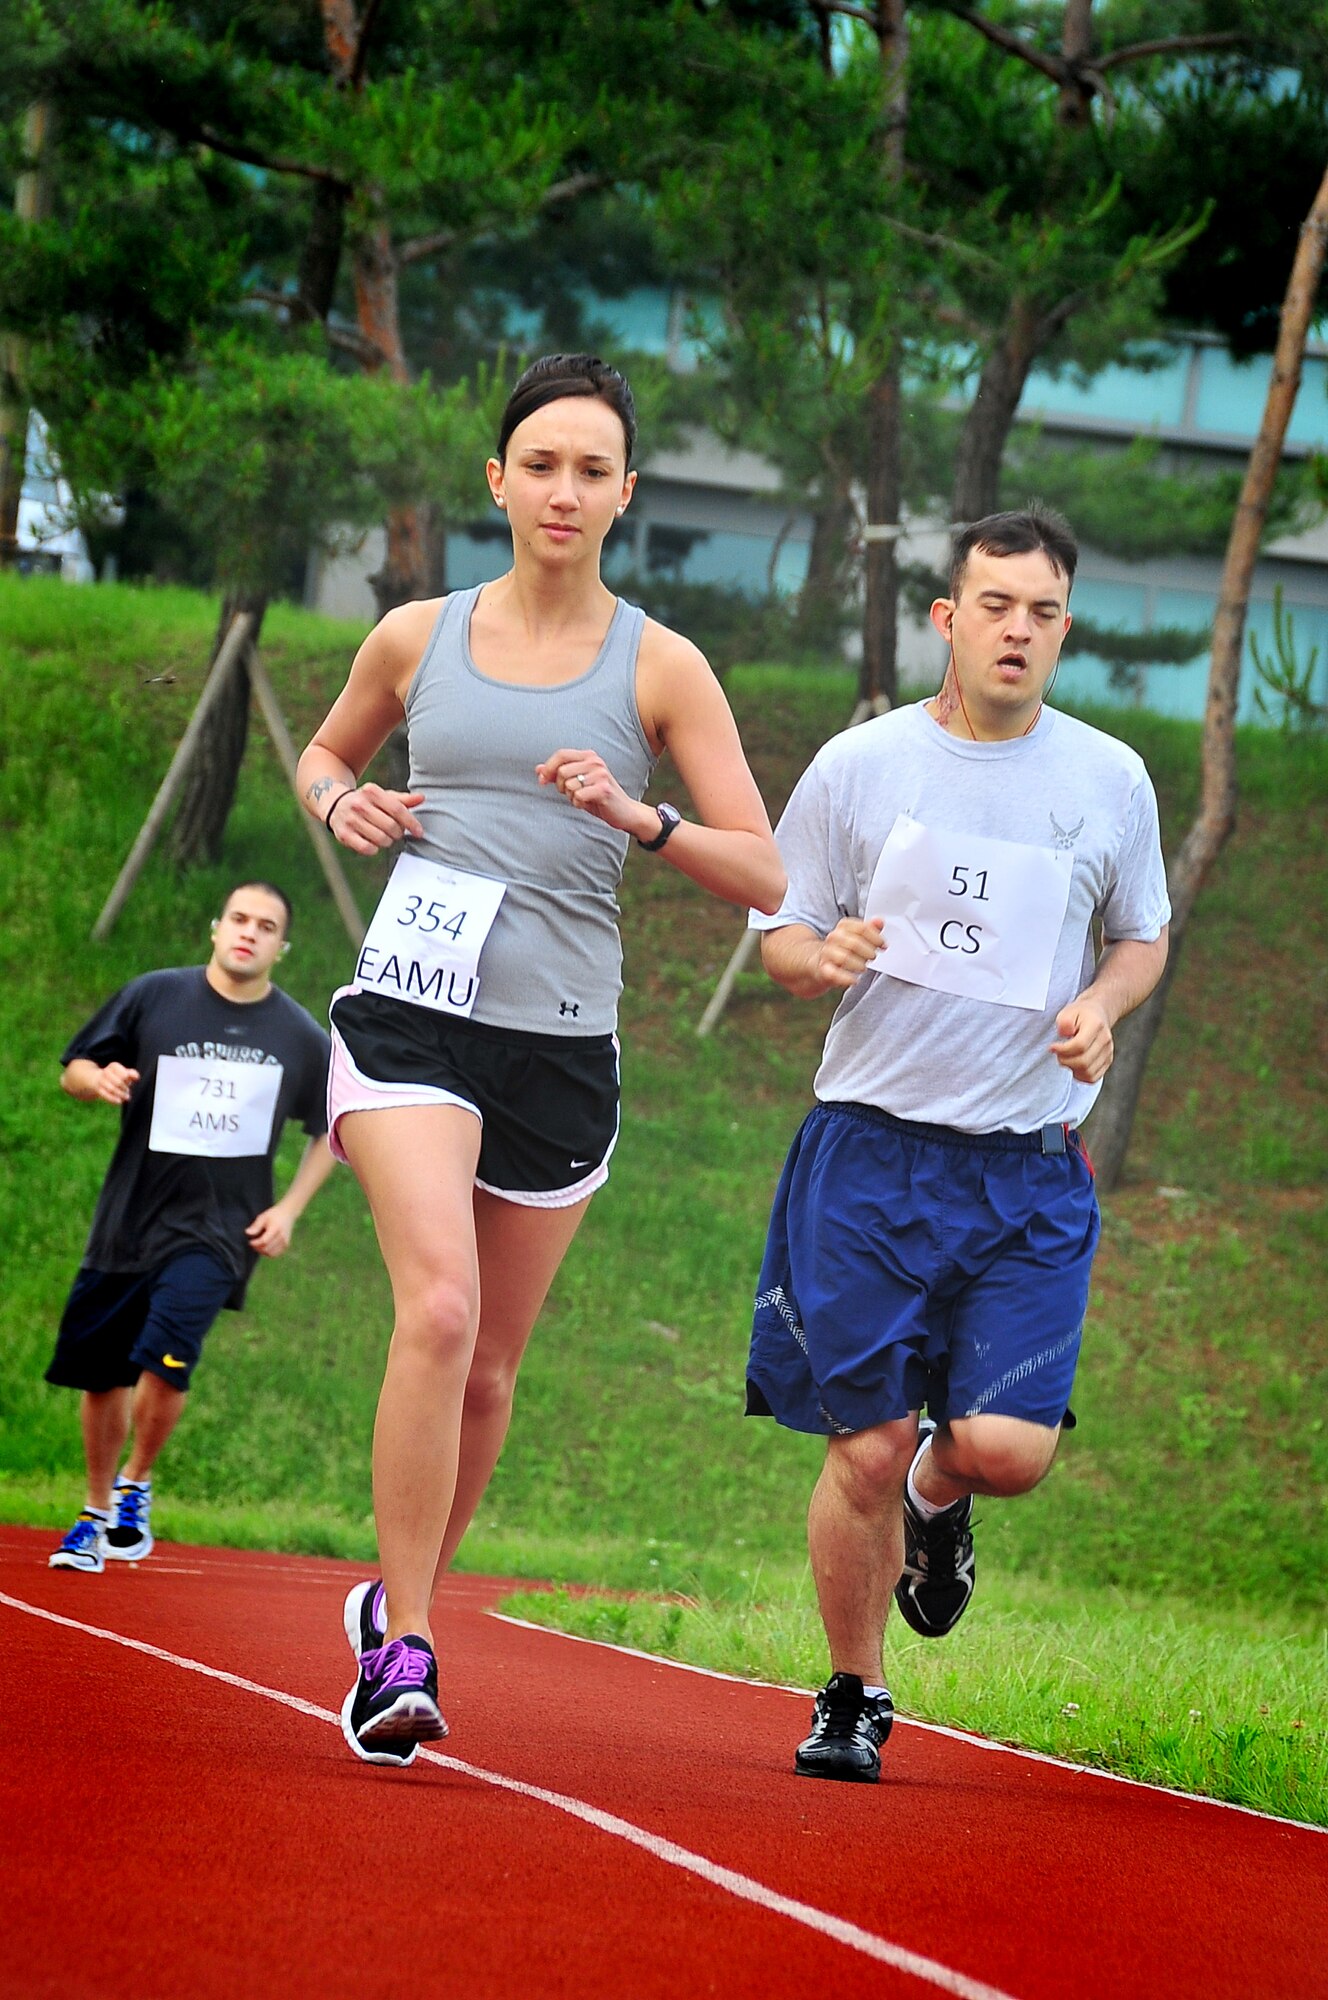 Over 400 Osan Air Base Airmen participated in a 10 hour run June 10, here.  The purpose of the run was to raise money through donations for Japan and Southern Tornadoes relief efforts, as well as boost troop morale.  Team Osan ran a total of 749.5 miles, raising $1,362.00. (U.S. Air Force Photo by/ Staff Sgt. Daylena Gonzalez)